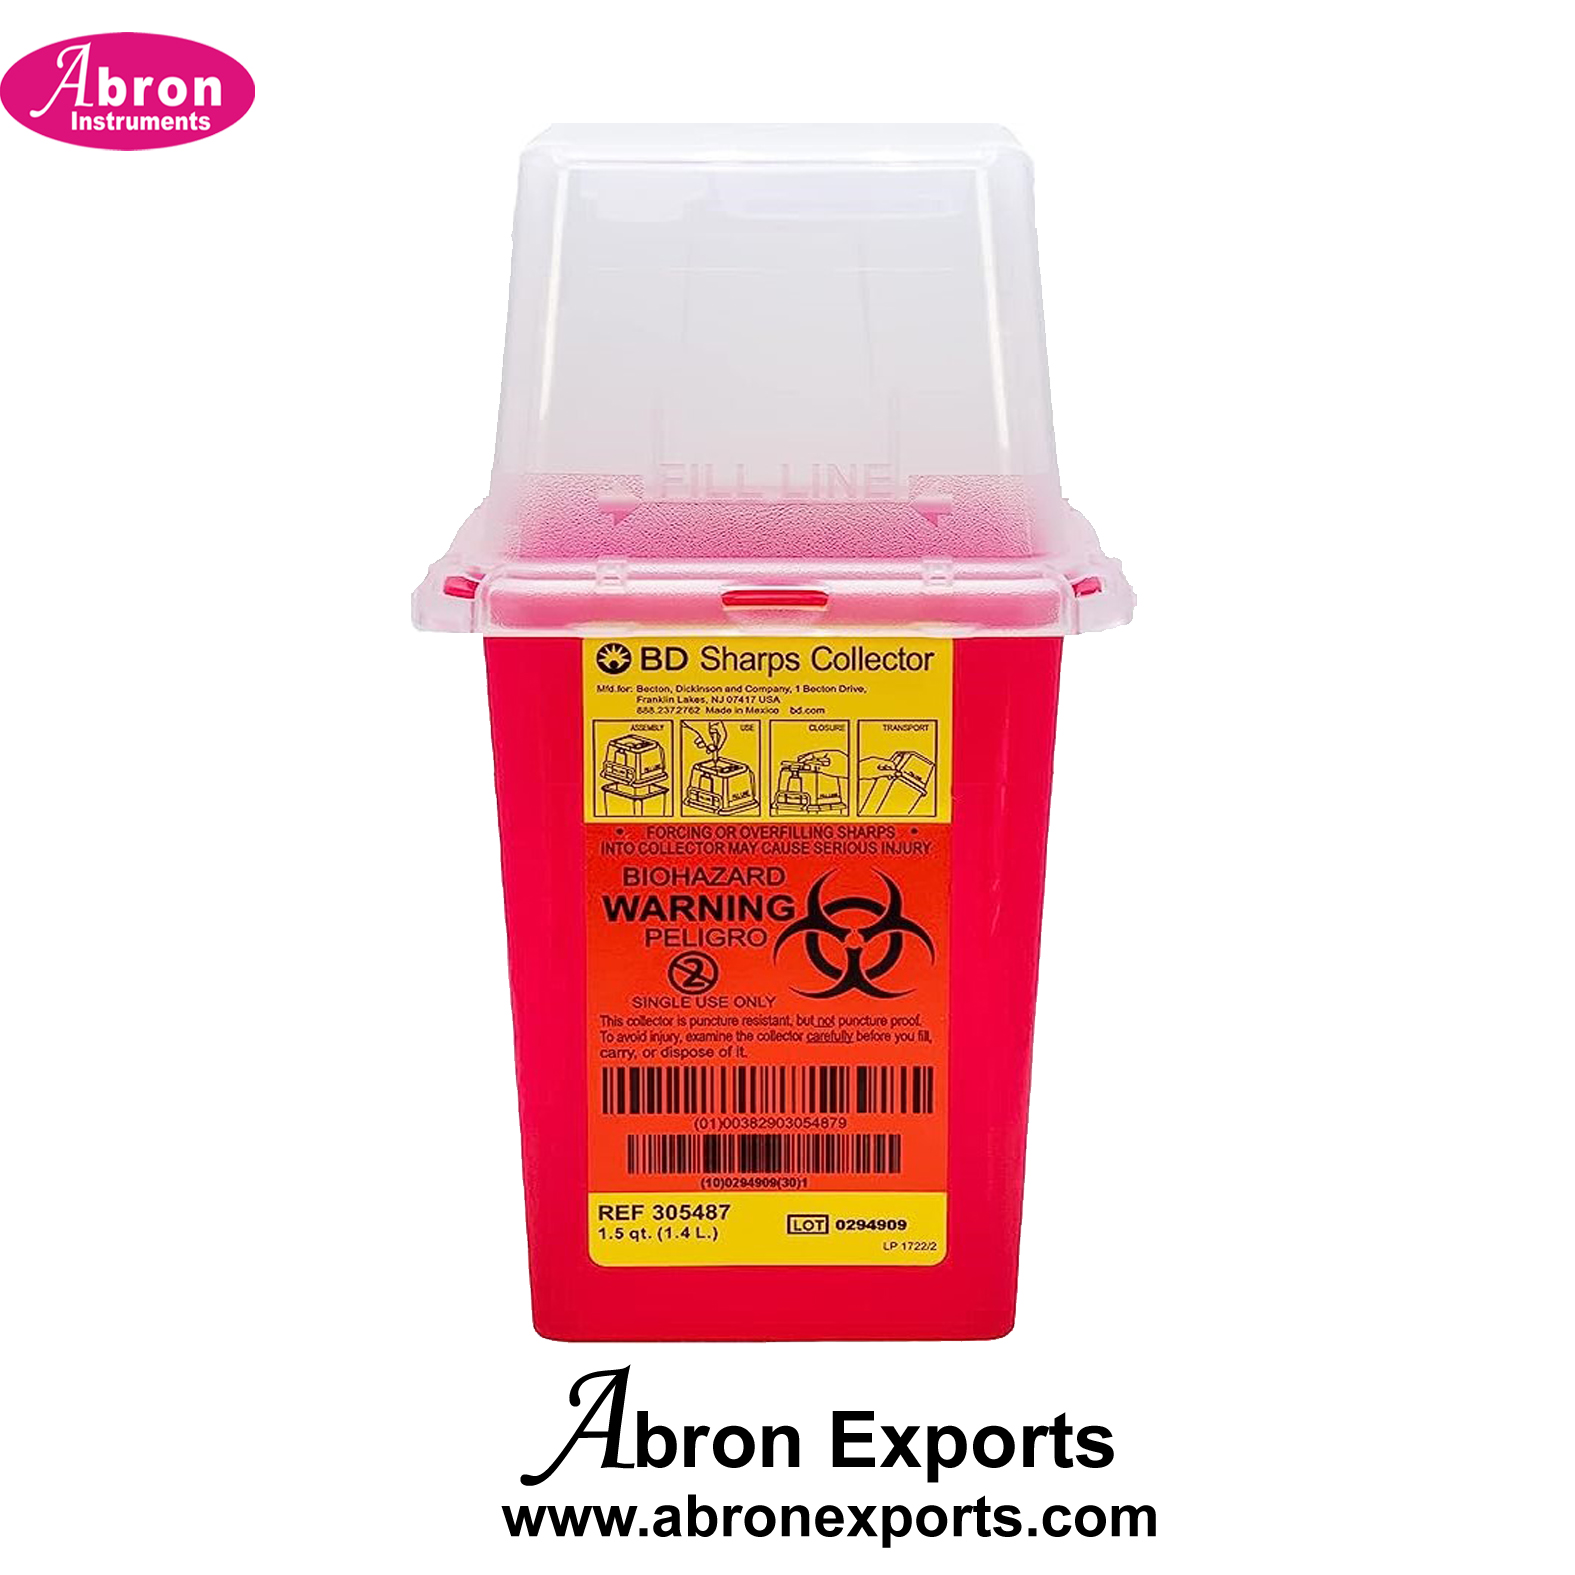 Syinge Needle Collector 1.4 liters Biohazard Disposable Bins Cardboard or LDPE lid Waste Abron ABM-2306C 